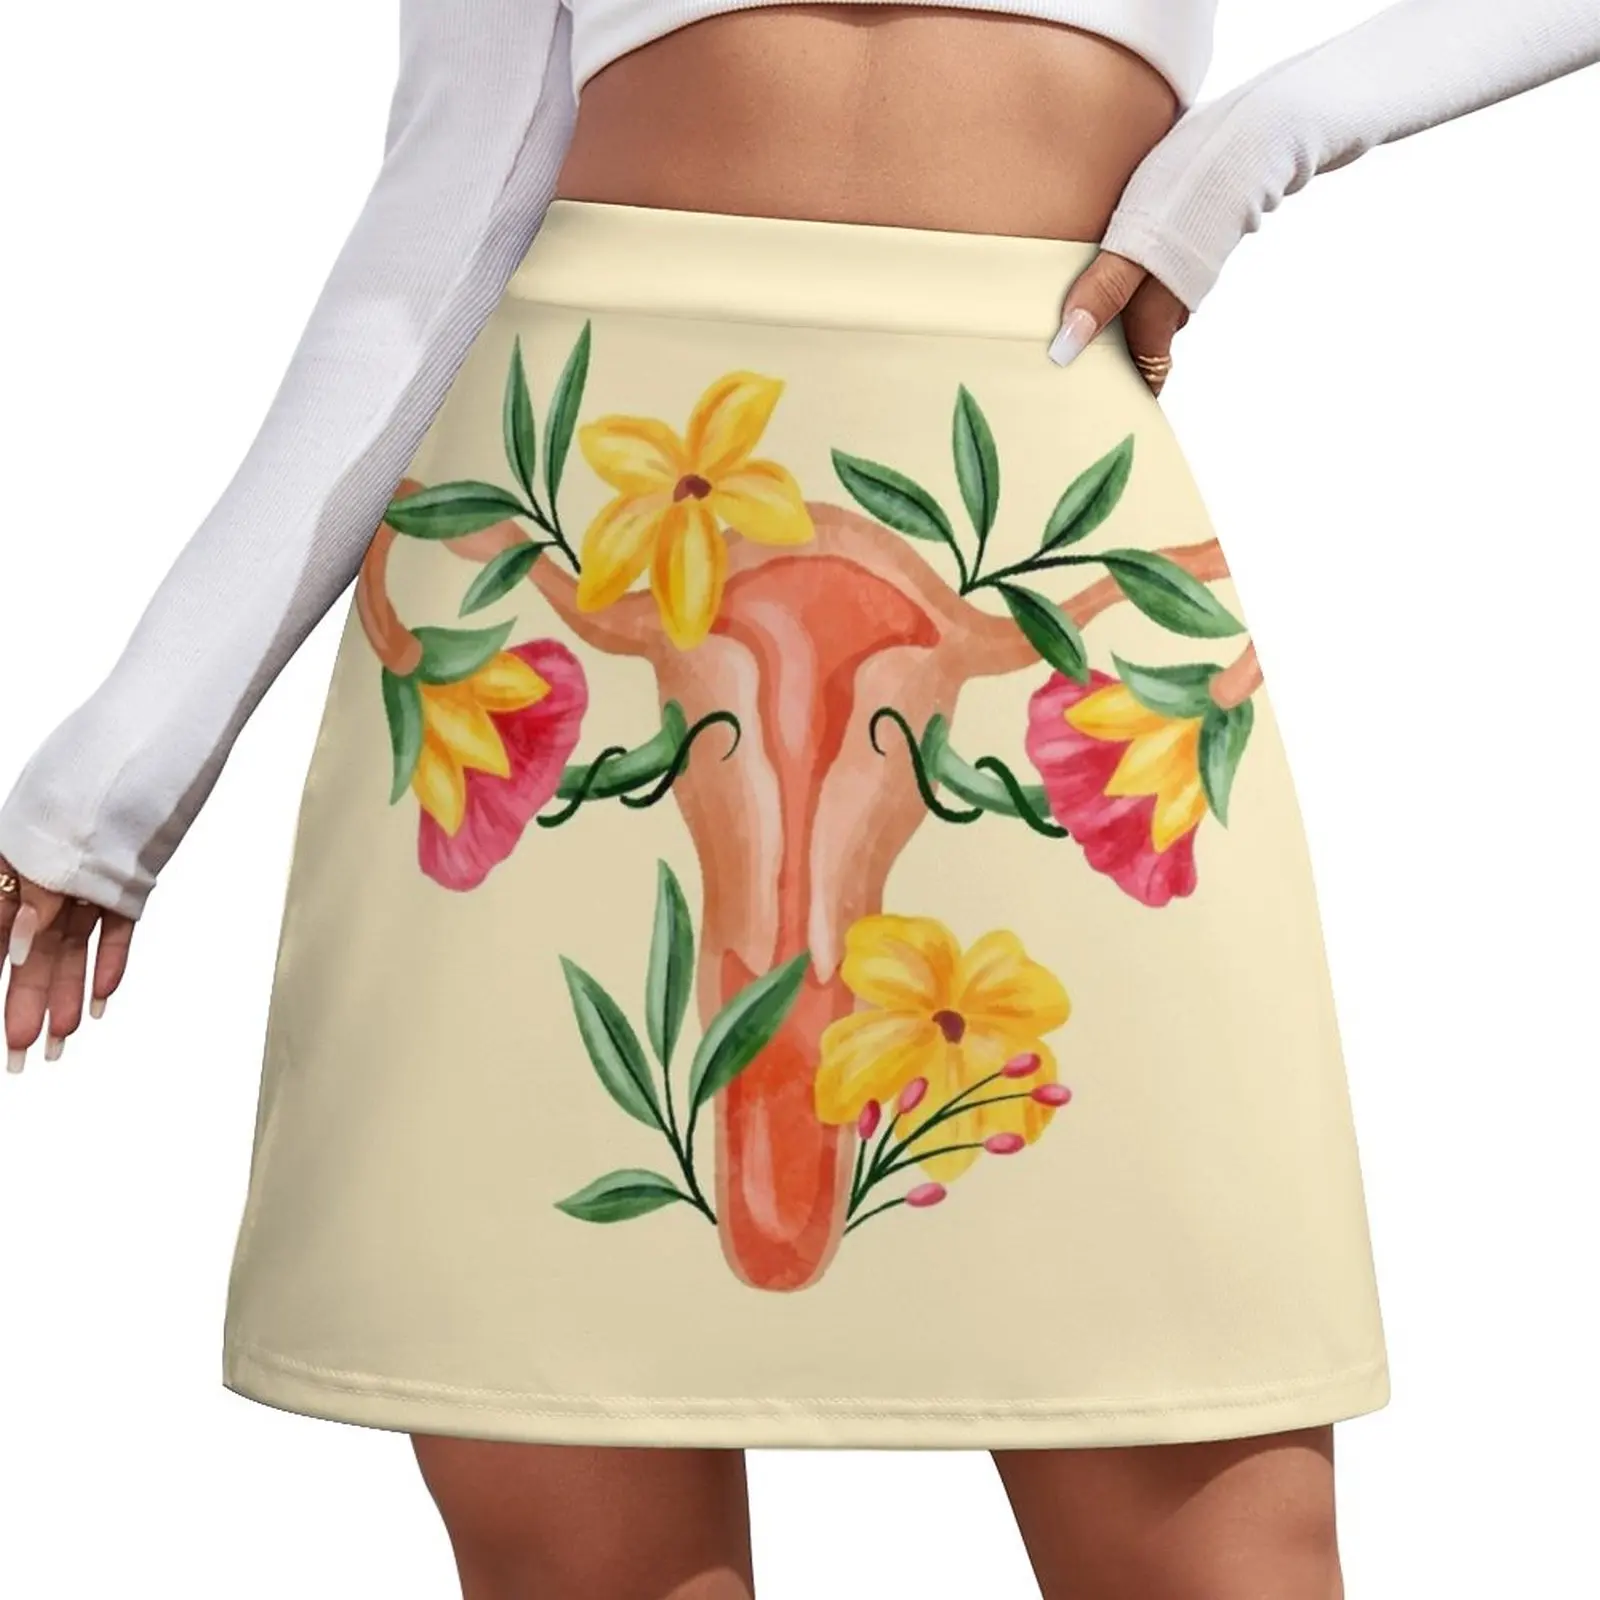 Floral Uterus and Ovaries Woman Reproductive System Mini Skirt kpop festival outfit women Women's skirt [nike]nike air max system men women sneakers running shoes dm9538 100